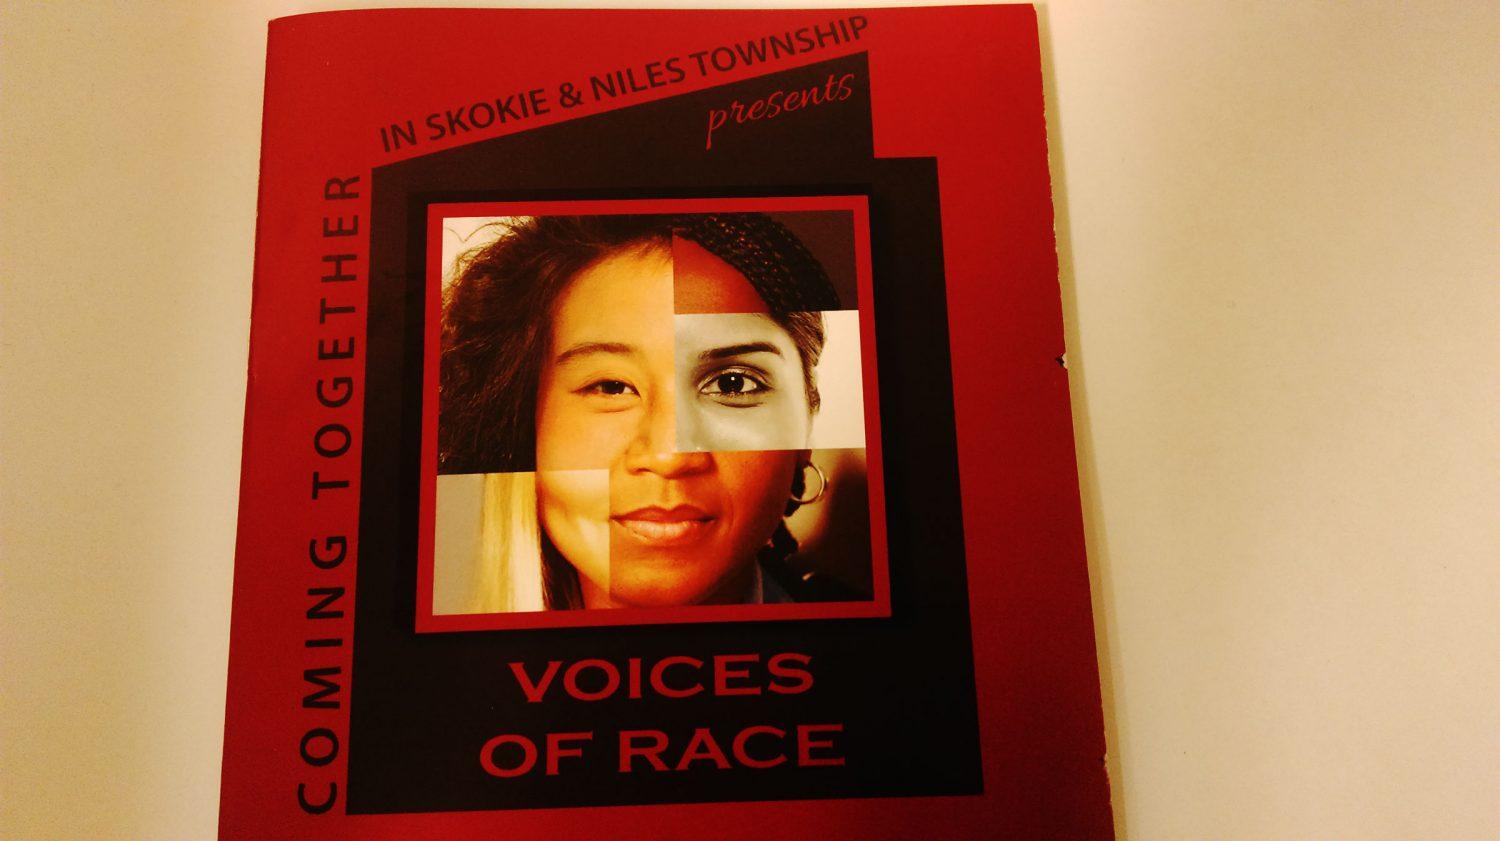 Illinois+Holocaust+Museum+to+host+Voices+of+Race